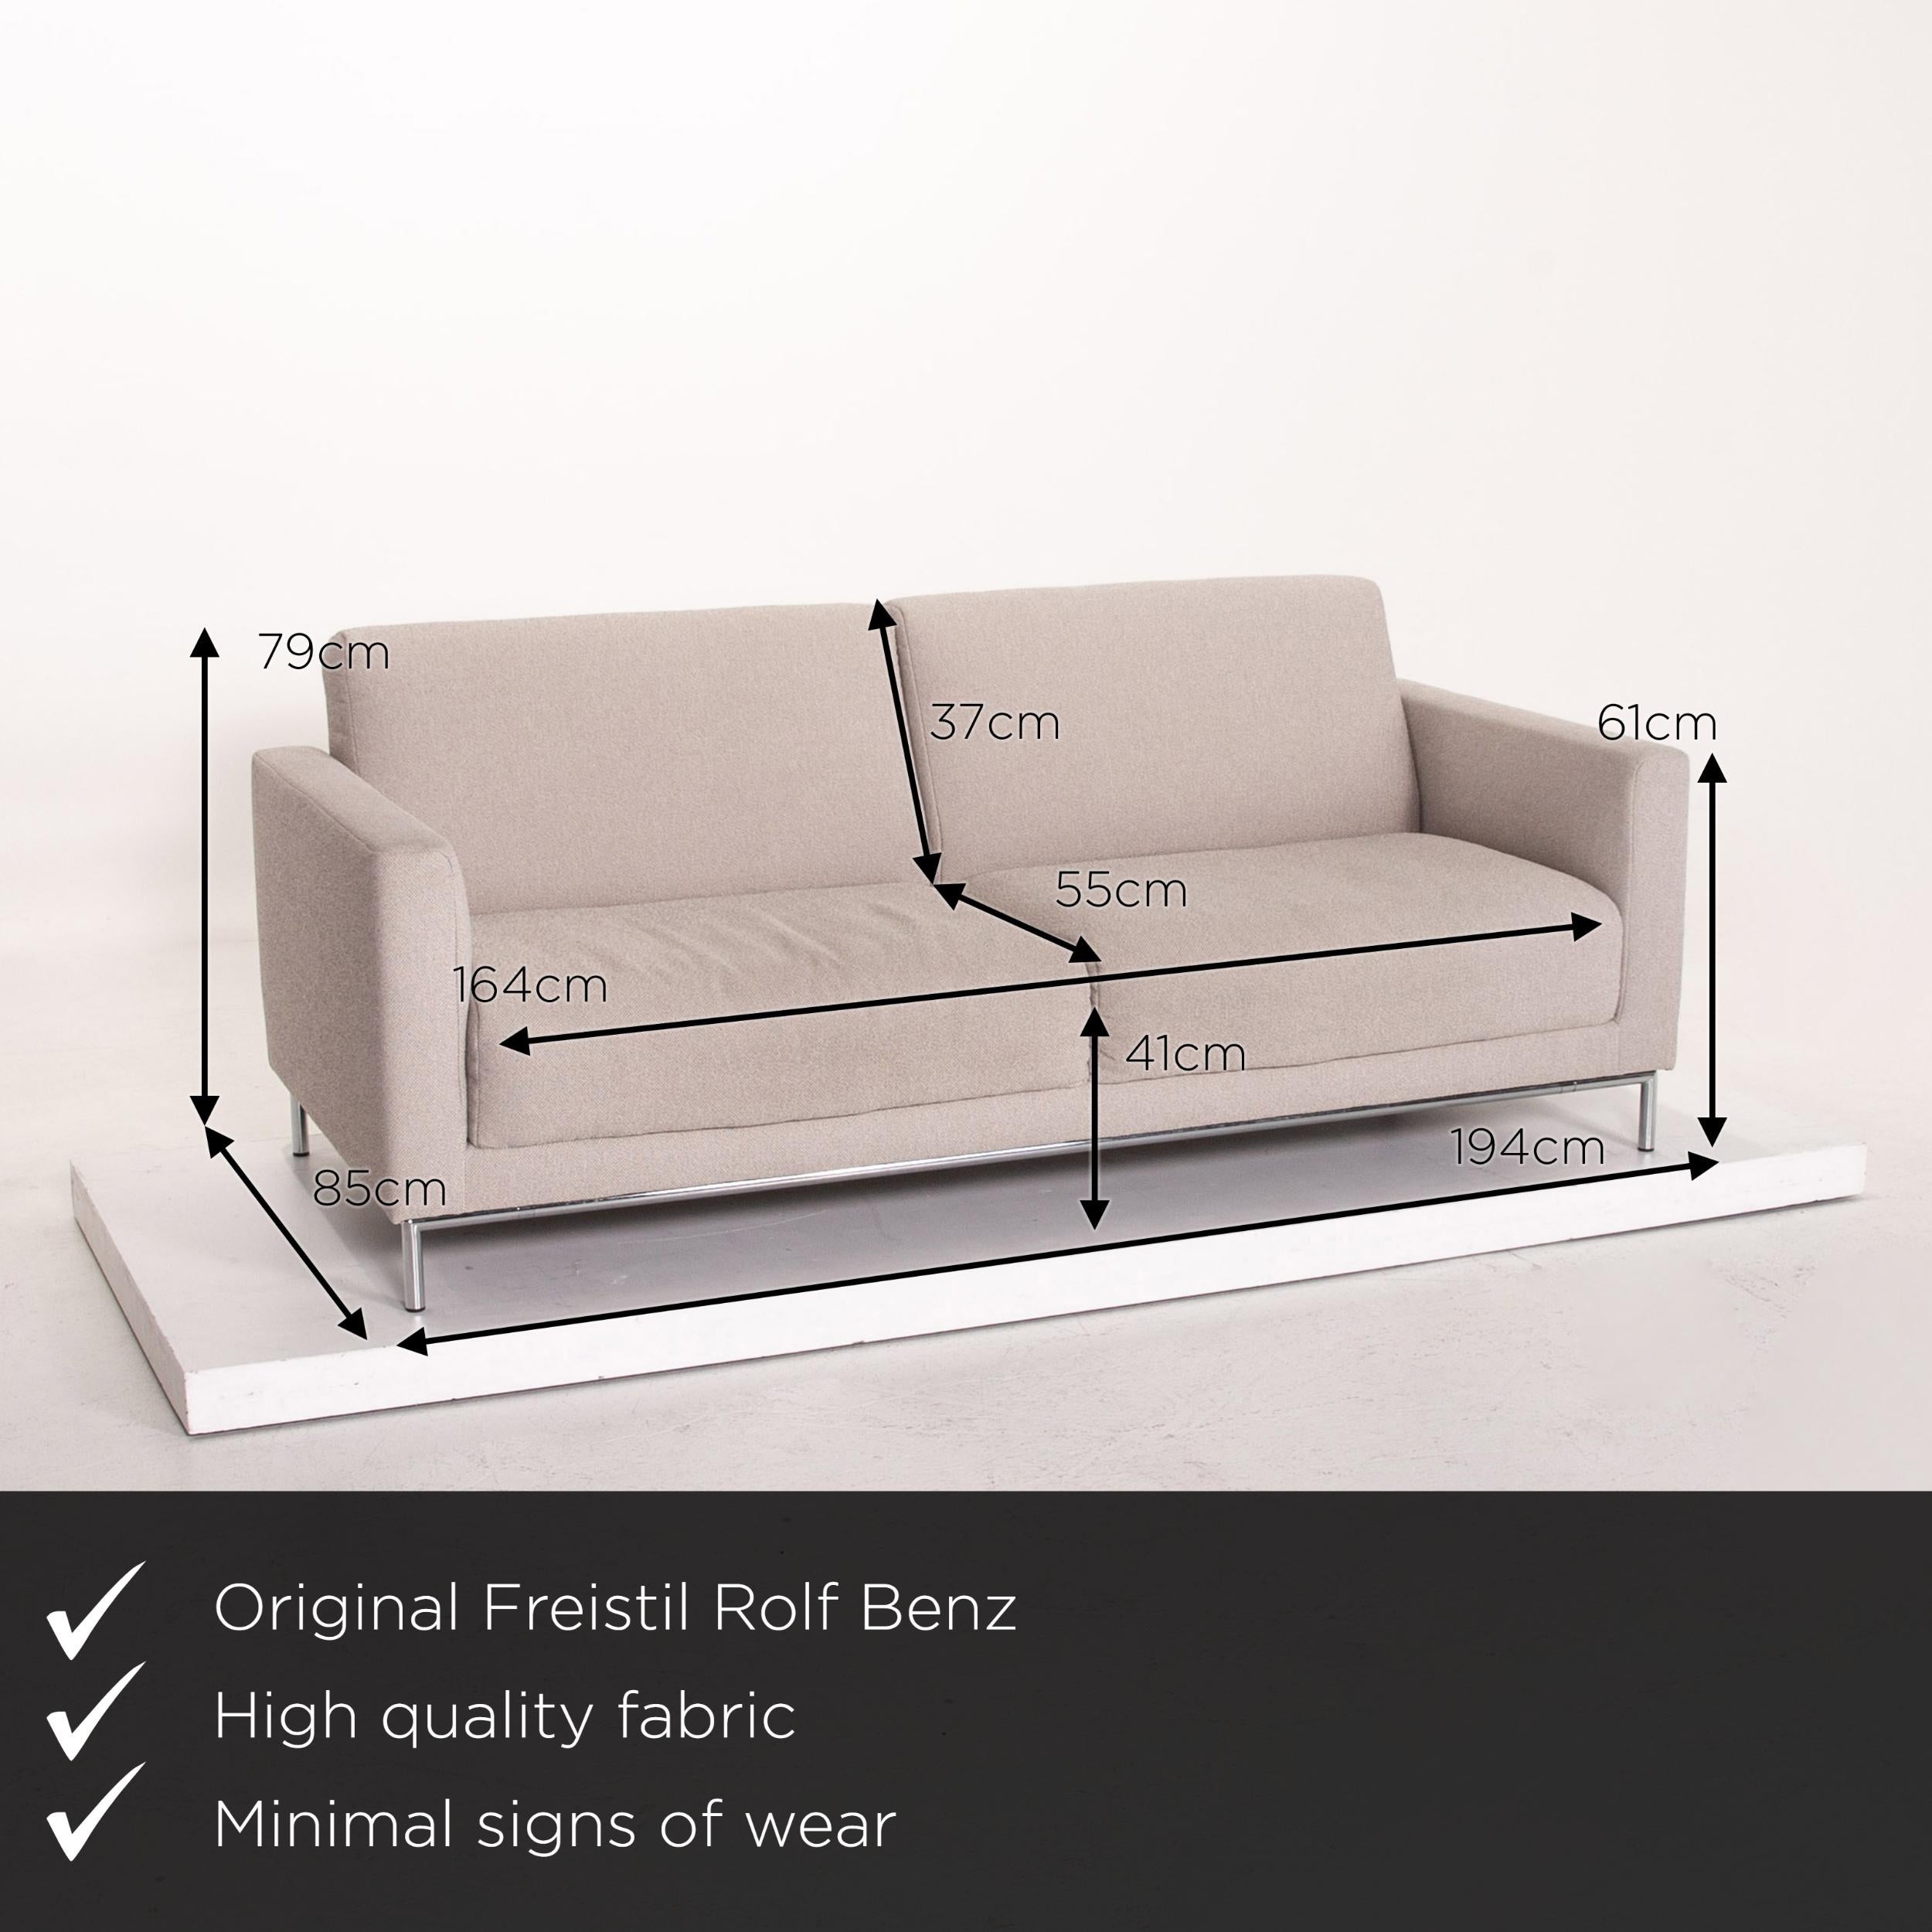 We present to you a Rolf Benz Freistil 141 fabric sofa gray two-seat couch.

Product measurements in centimeters:

Depth 85
Width 194
Height 79
Seat height 41
Rest height 61
Seat depth 55
Seat width 164
Back height 37.
 
  
  